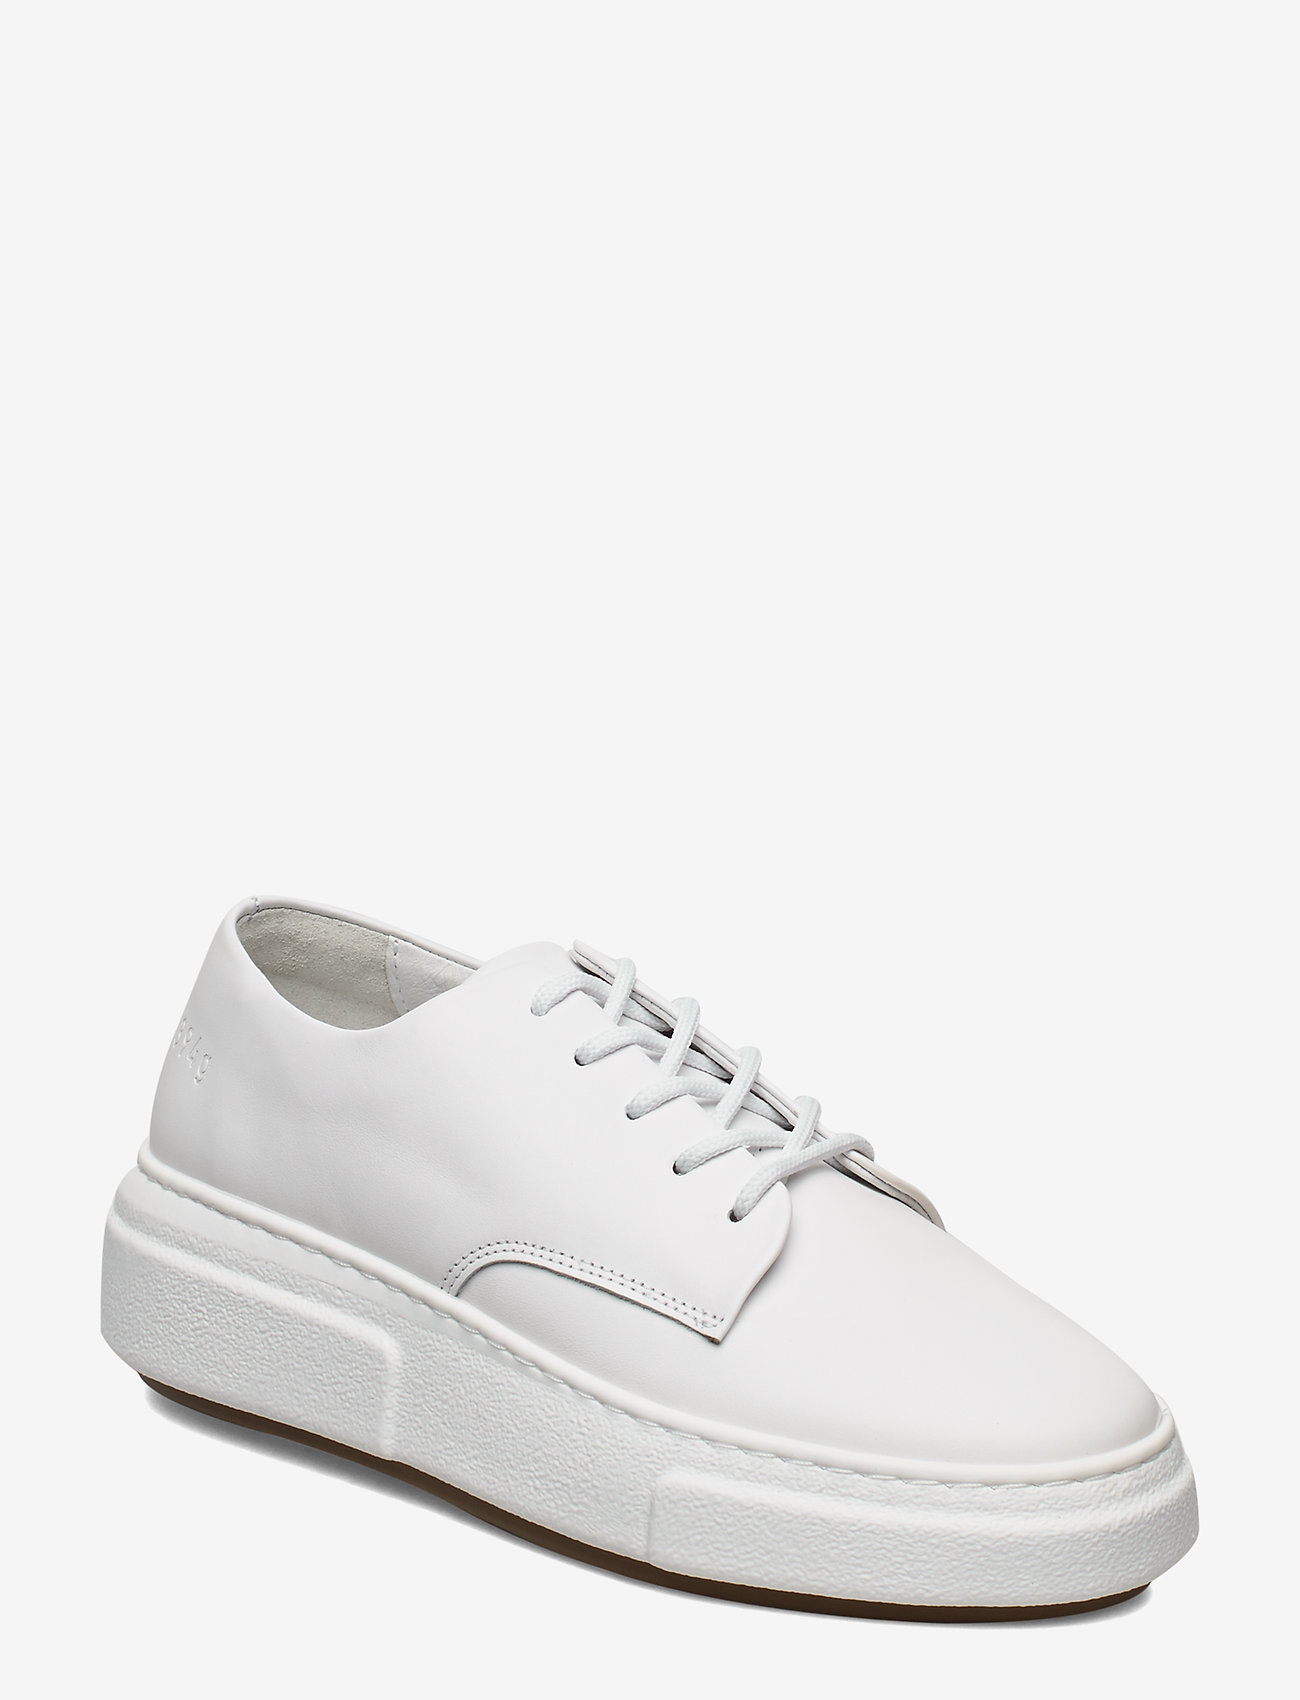 wide white leather sneakers